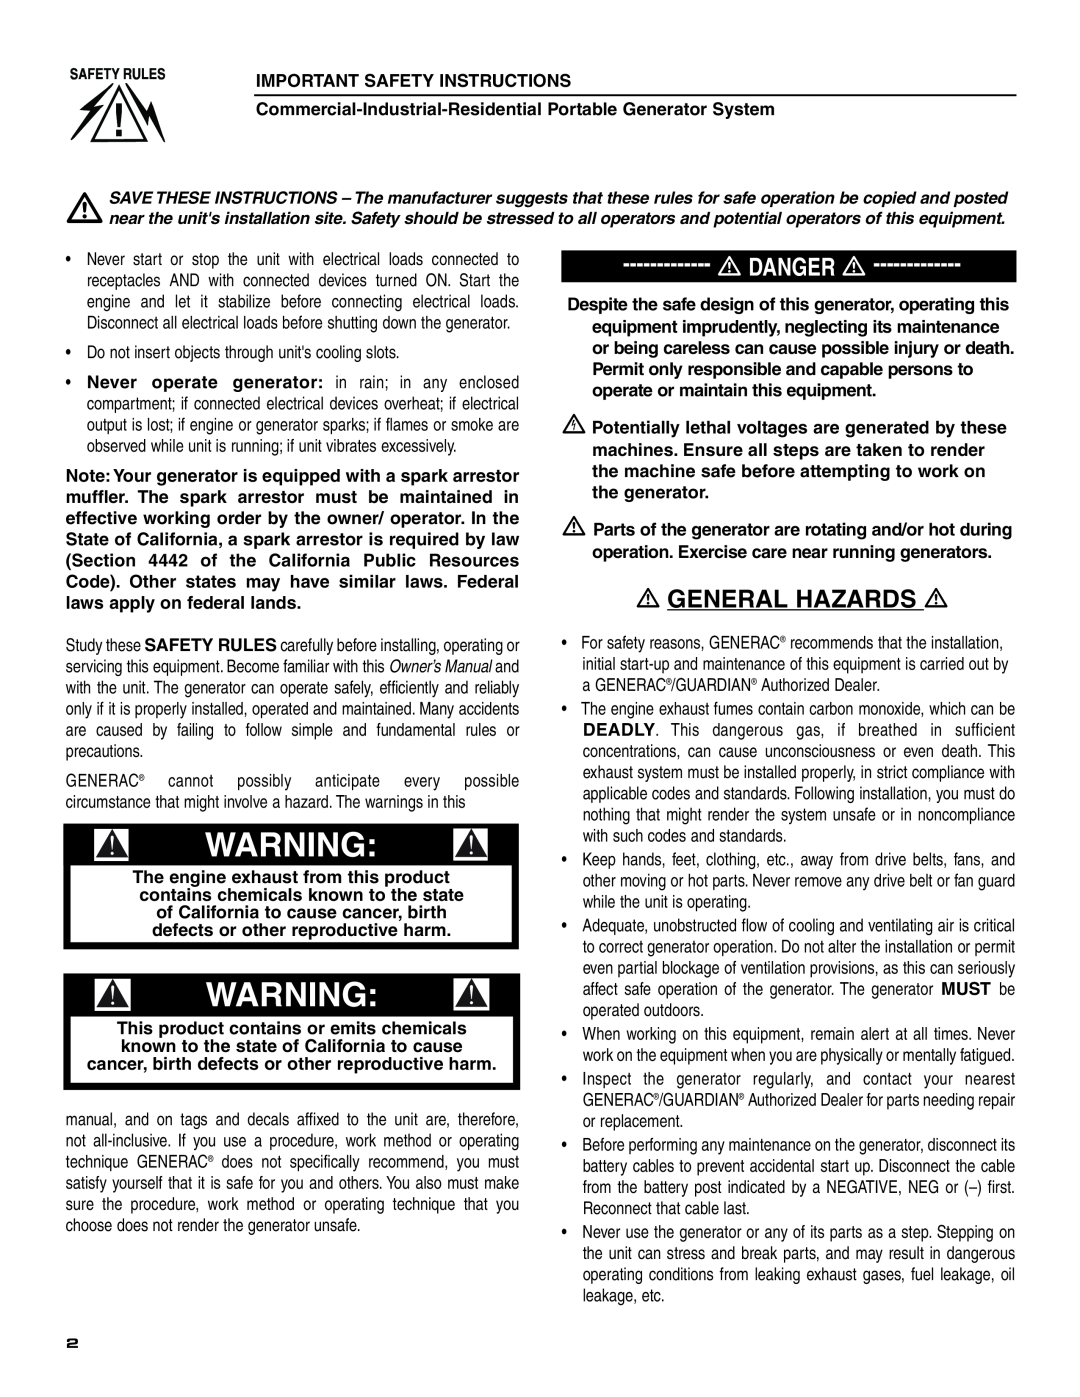 Generac 004451 ,004582 General Hazards, Danger, Important Safety Instructions, This product contains or emits chemicals 